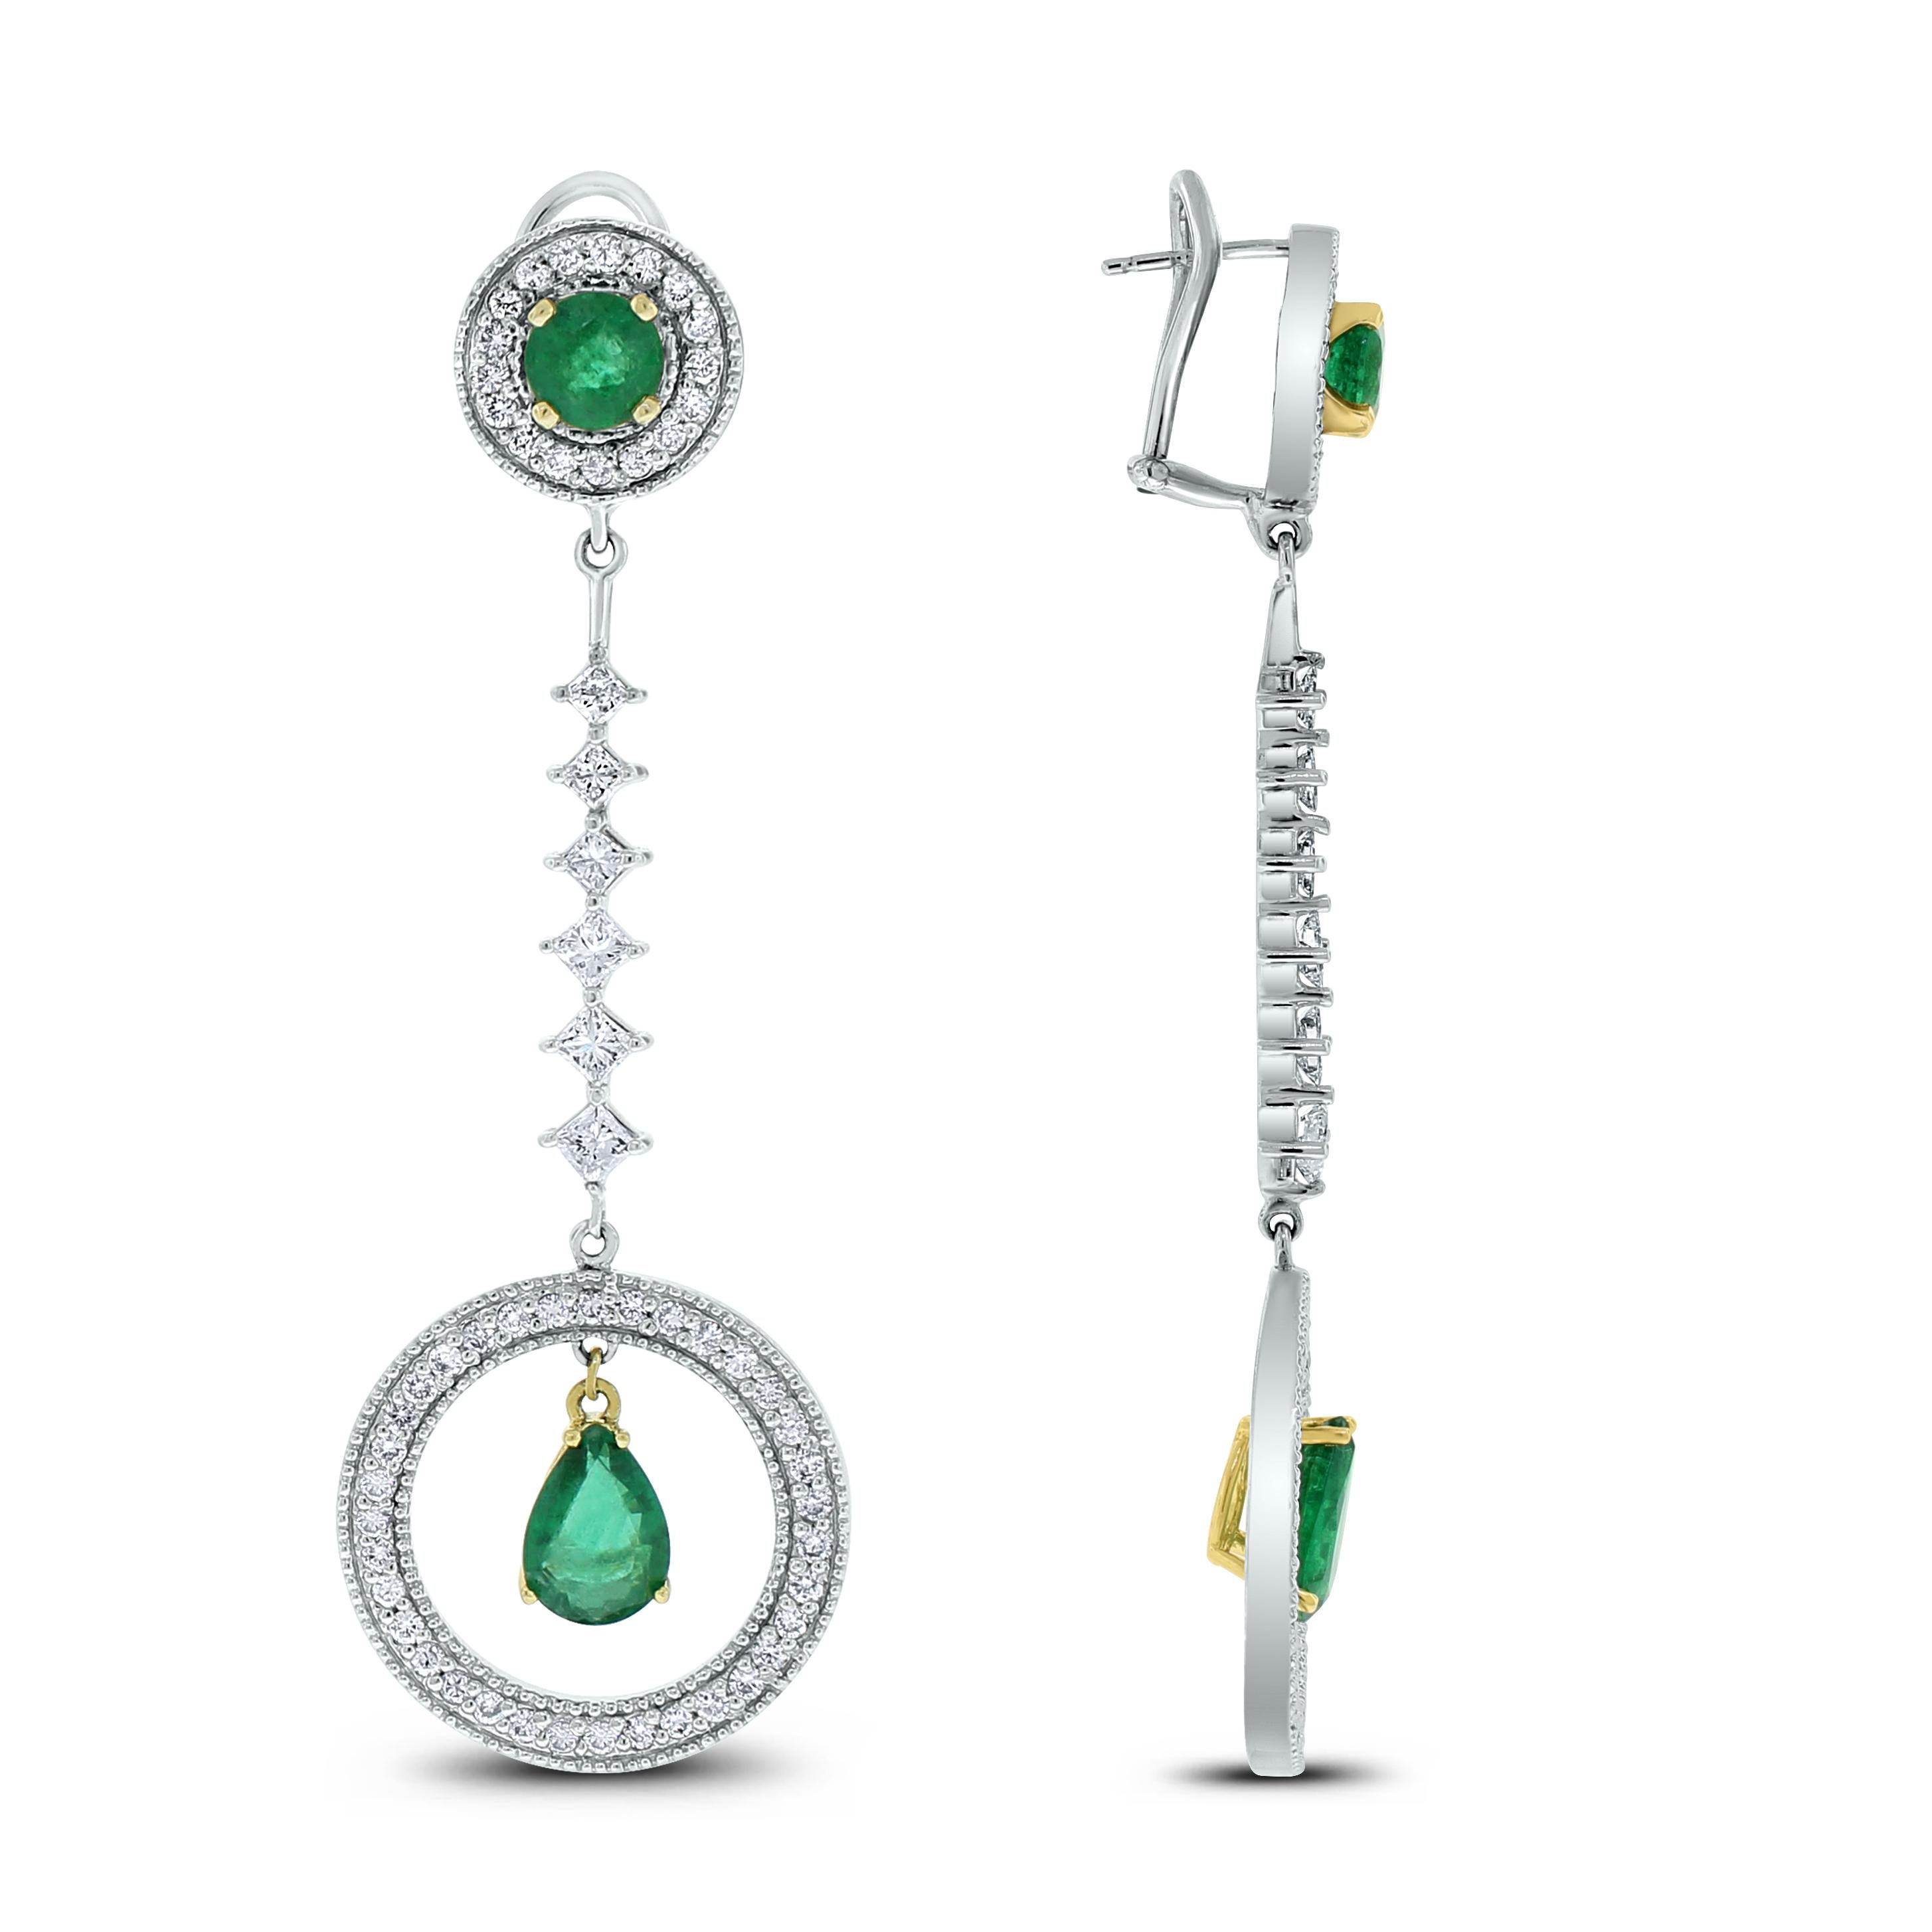 The Clara Diamond & Emerald Earrings showcase a unique combination of colors and shapes. They are youthful and rebellious in their essence.

Gemstones Type: Natural Emeralds 
Gemstones Shape: Pear Shape & Round 
Gemstones Weight: 5.90 ct 
No. of